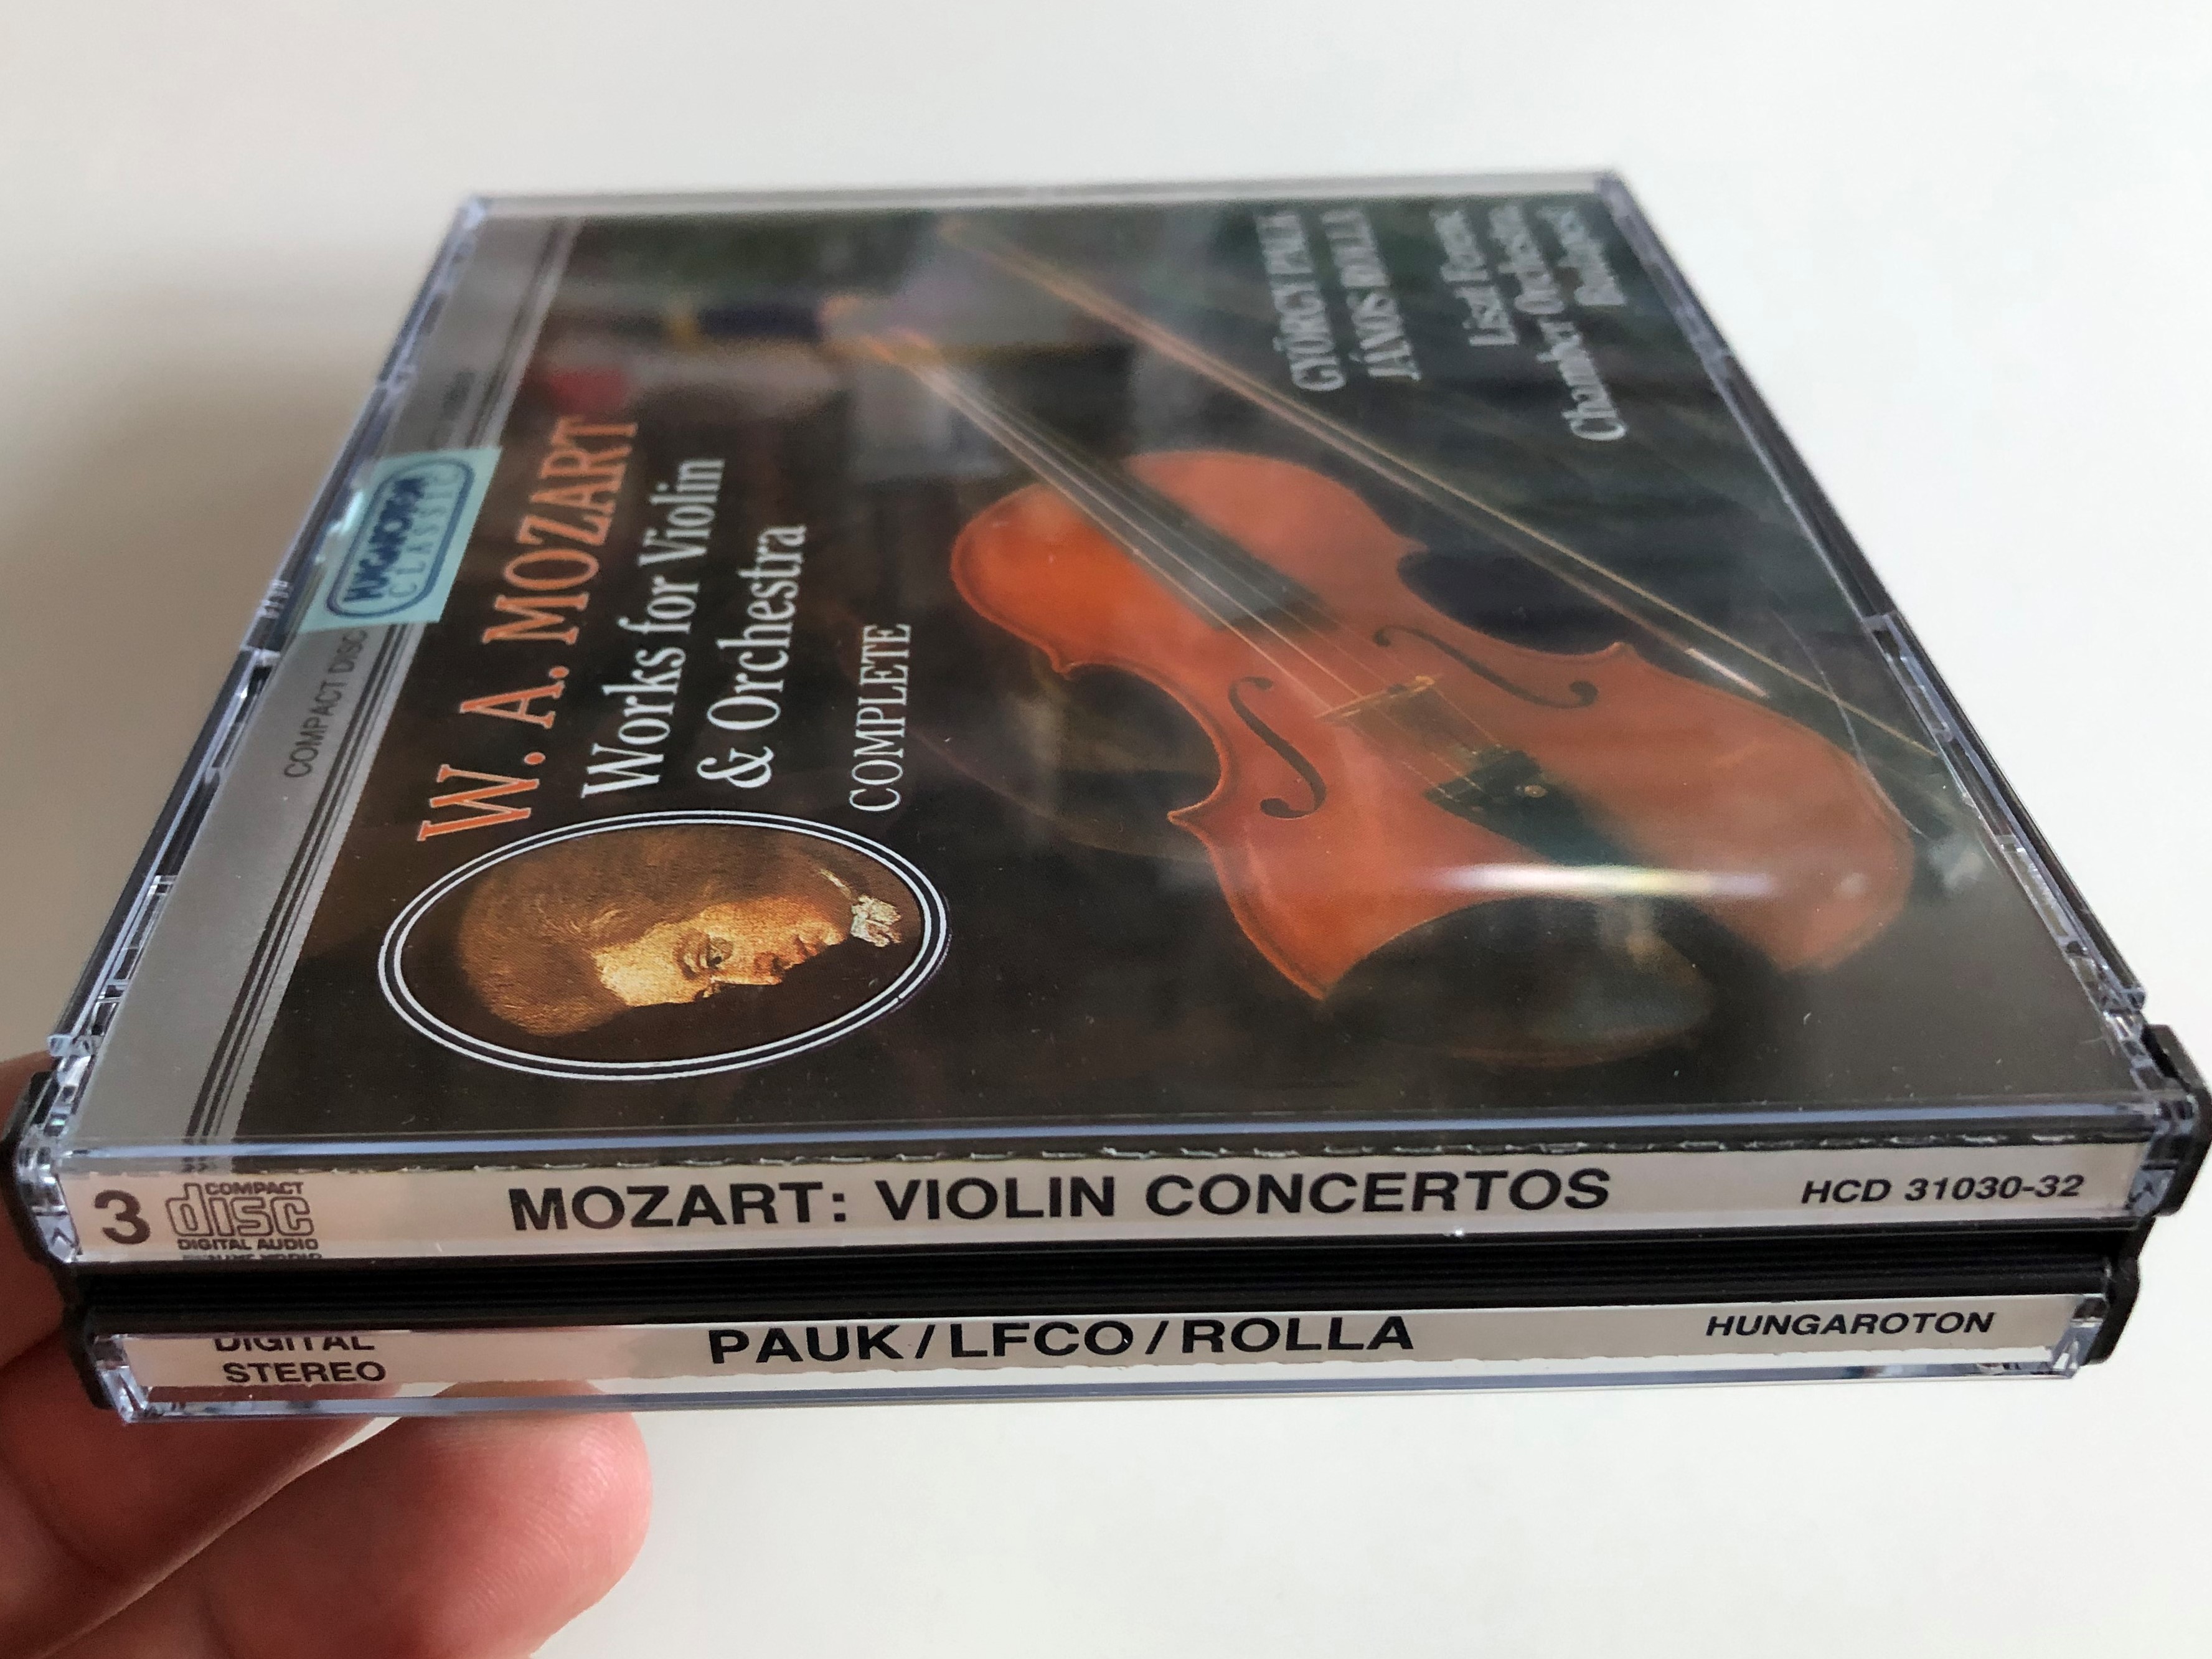 w.-a.-mozart-works-for-violin-orchestra-complete-gy-rgy-pauk-j-nos-rolla-liszt-ferenc-chamber-orchestra-budapest-hungaroton-classic-3x-audio-cd-1995-stereo-hcd-31030-32-2-.jpg